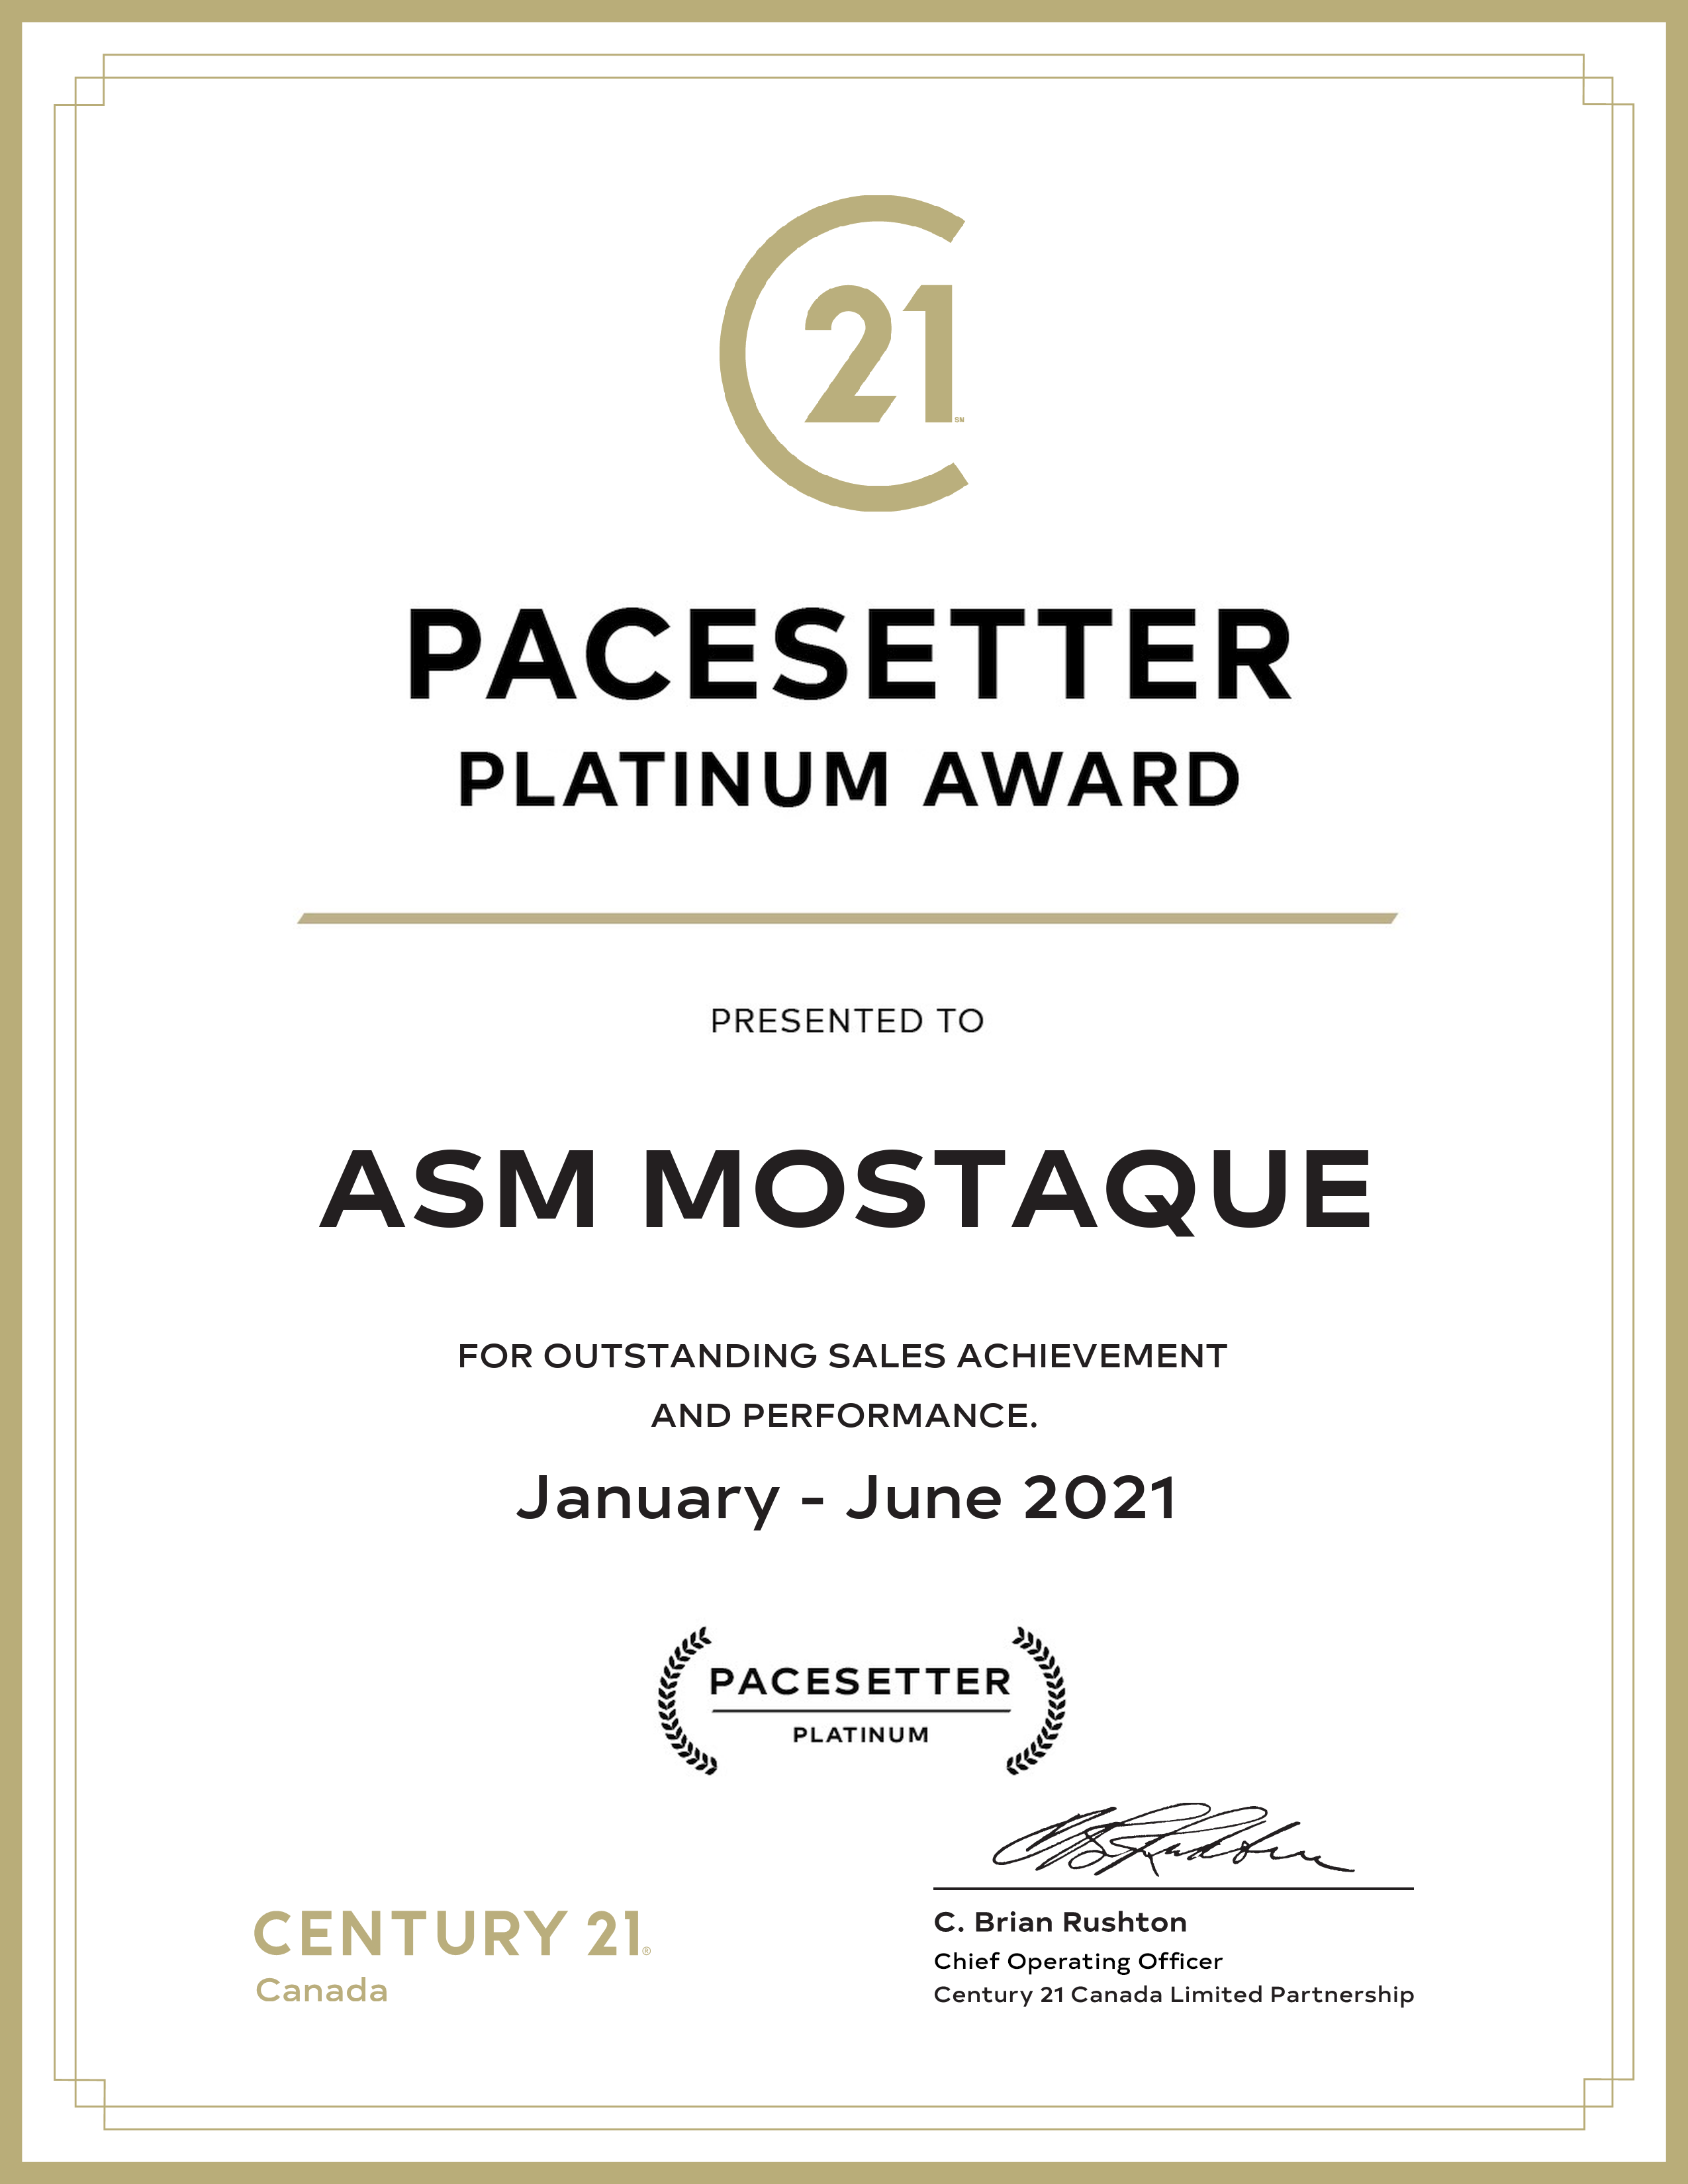 ASM-Mostaque Mid year